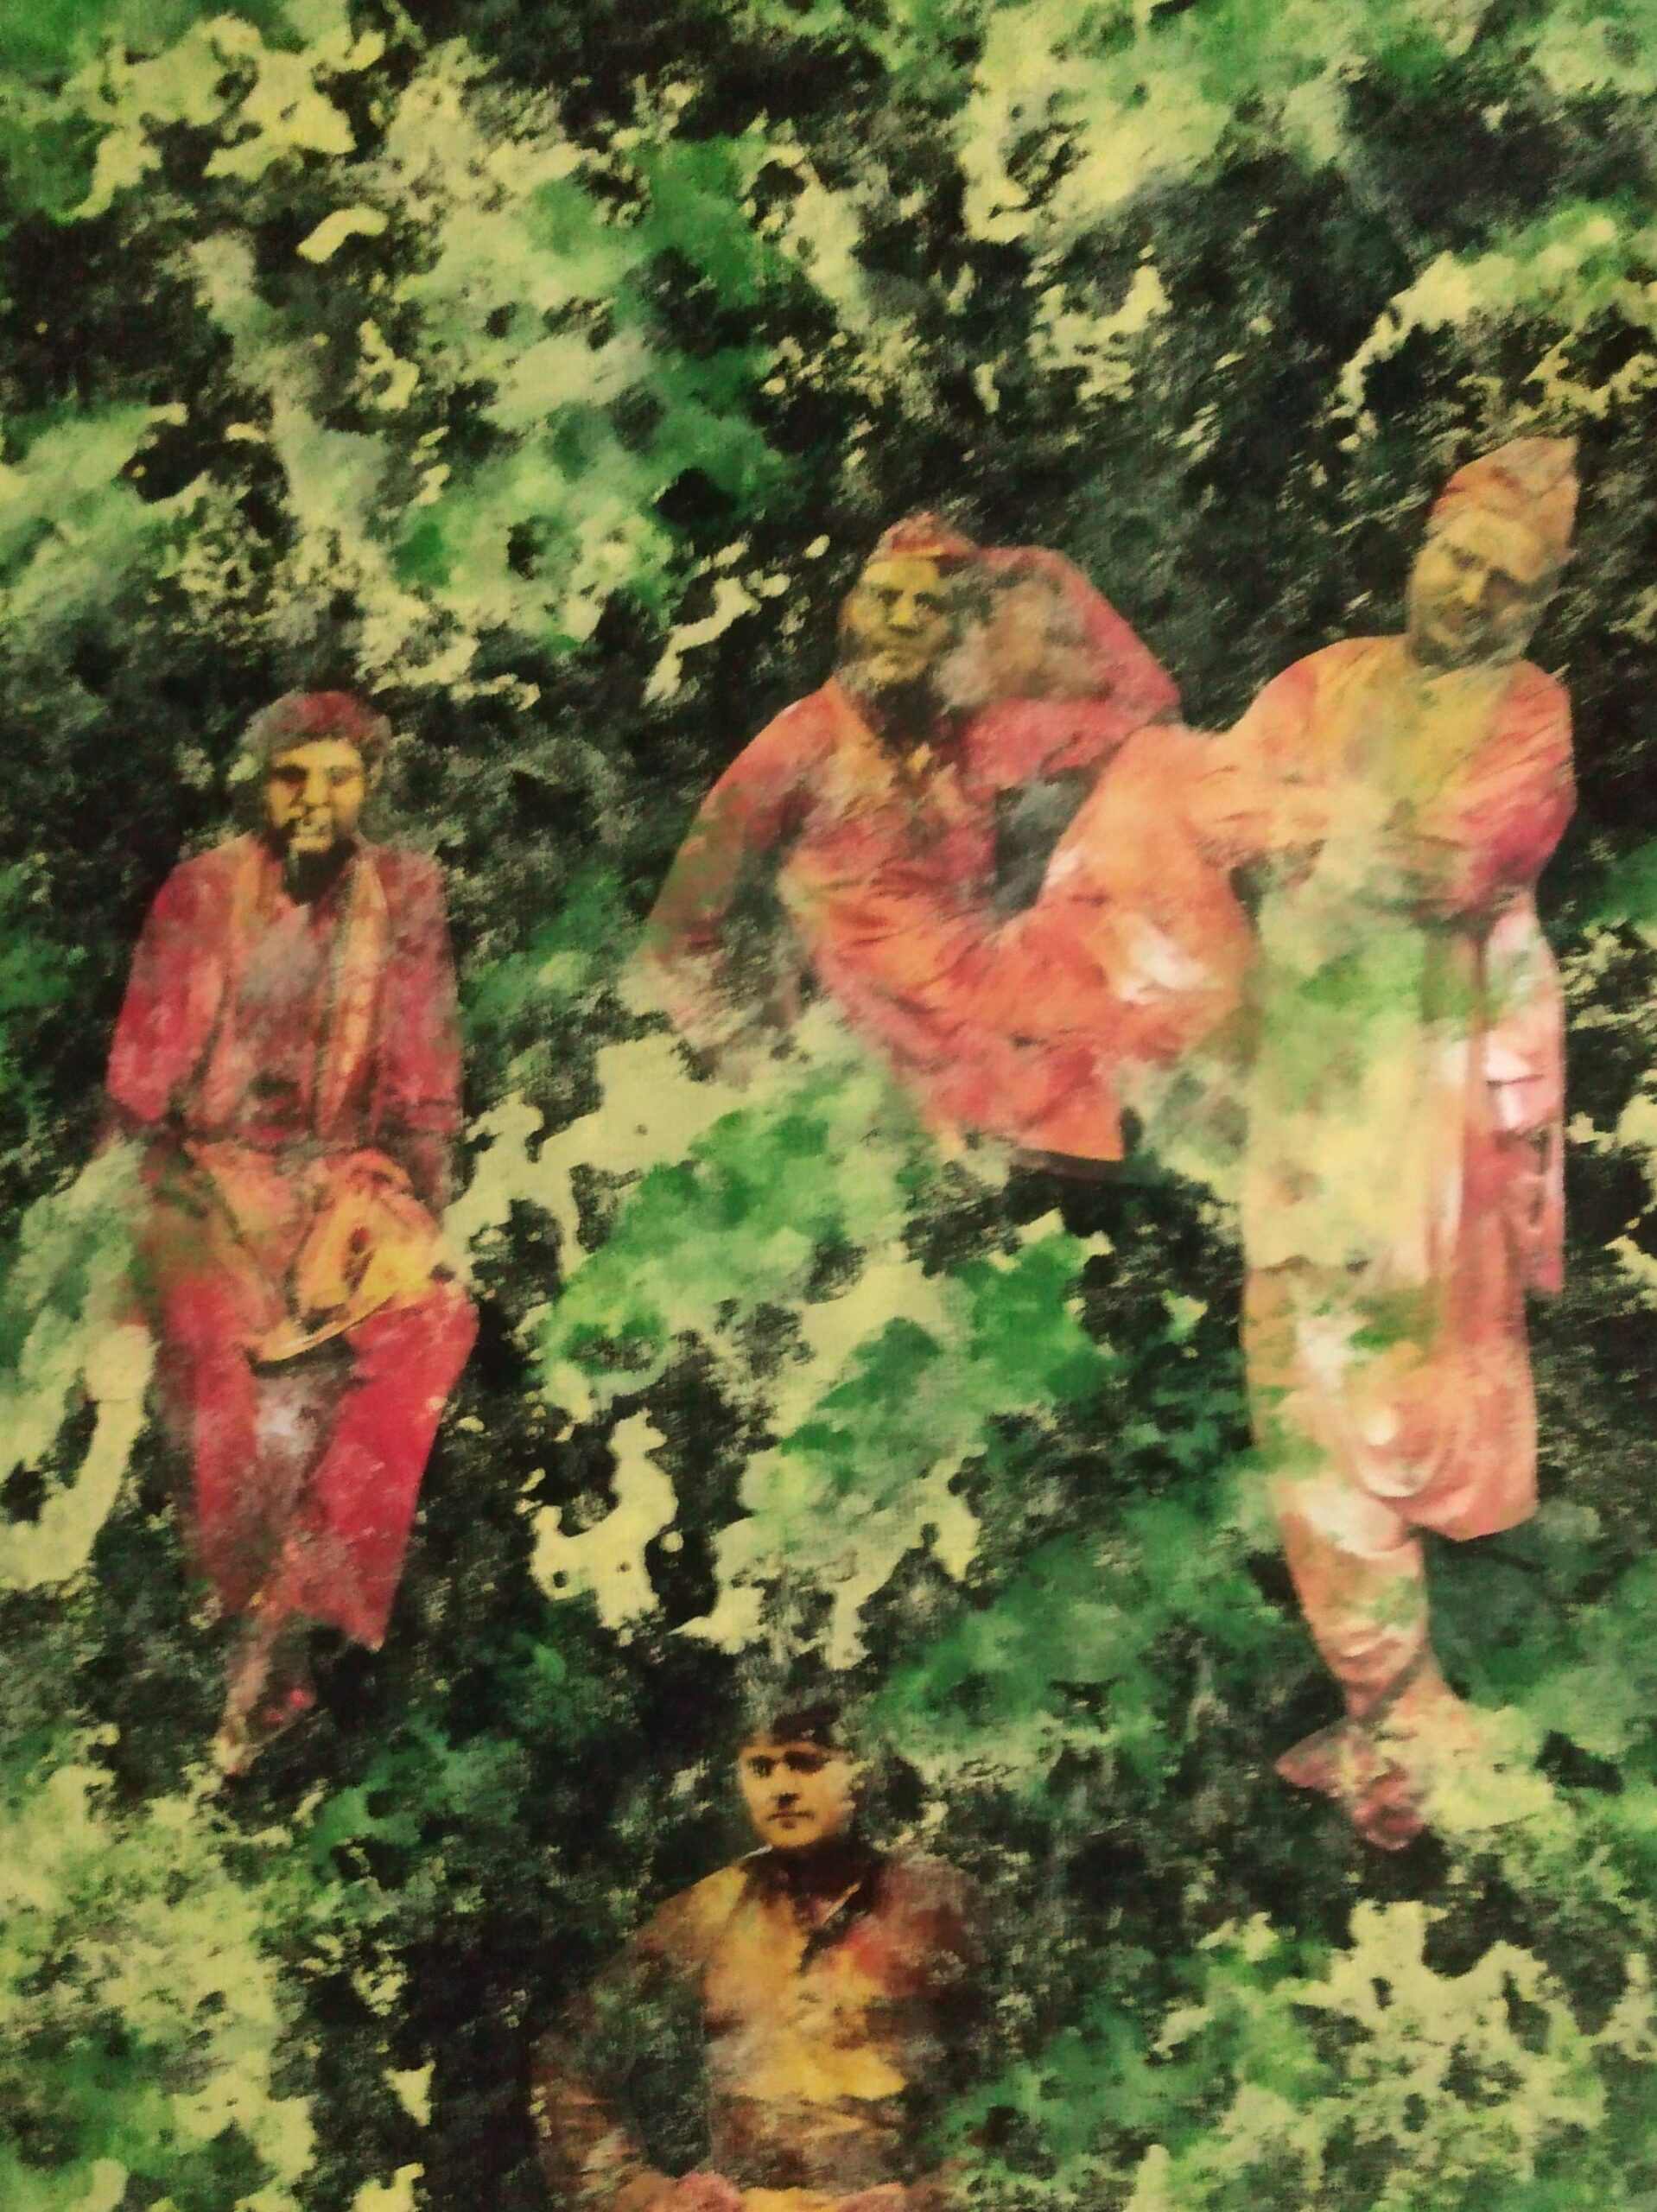 A digital collage of four male presenting dark skin people in red garments surrounded by green and yellow pattern.